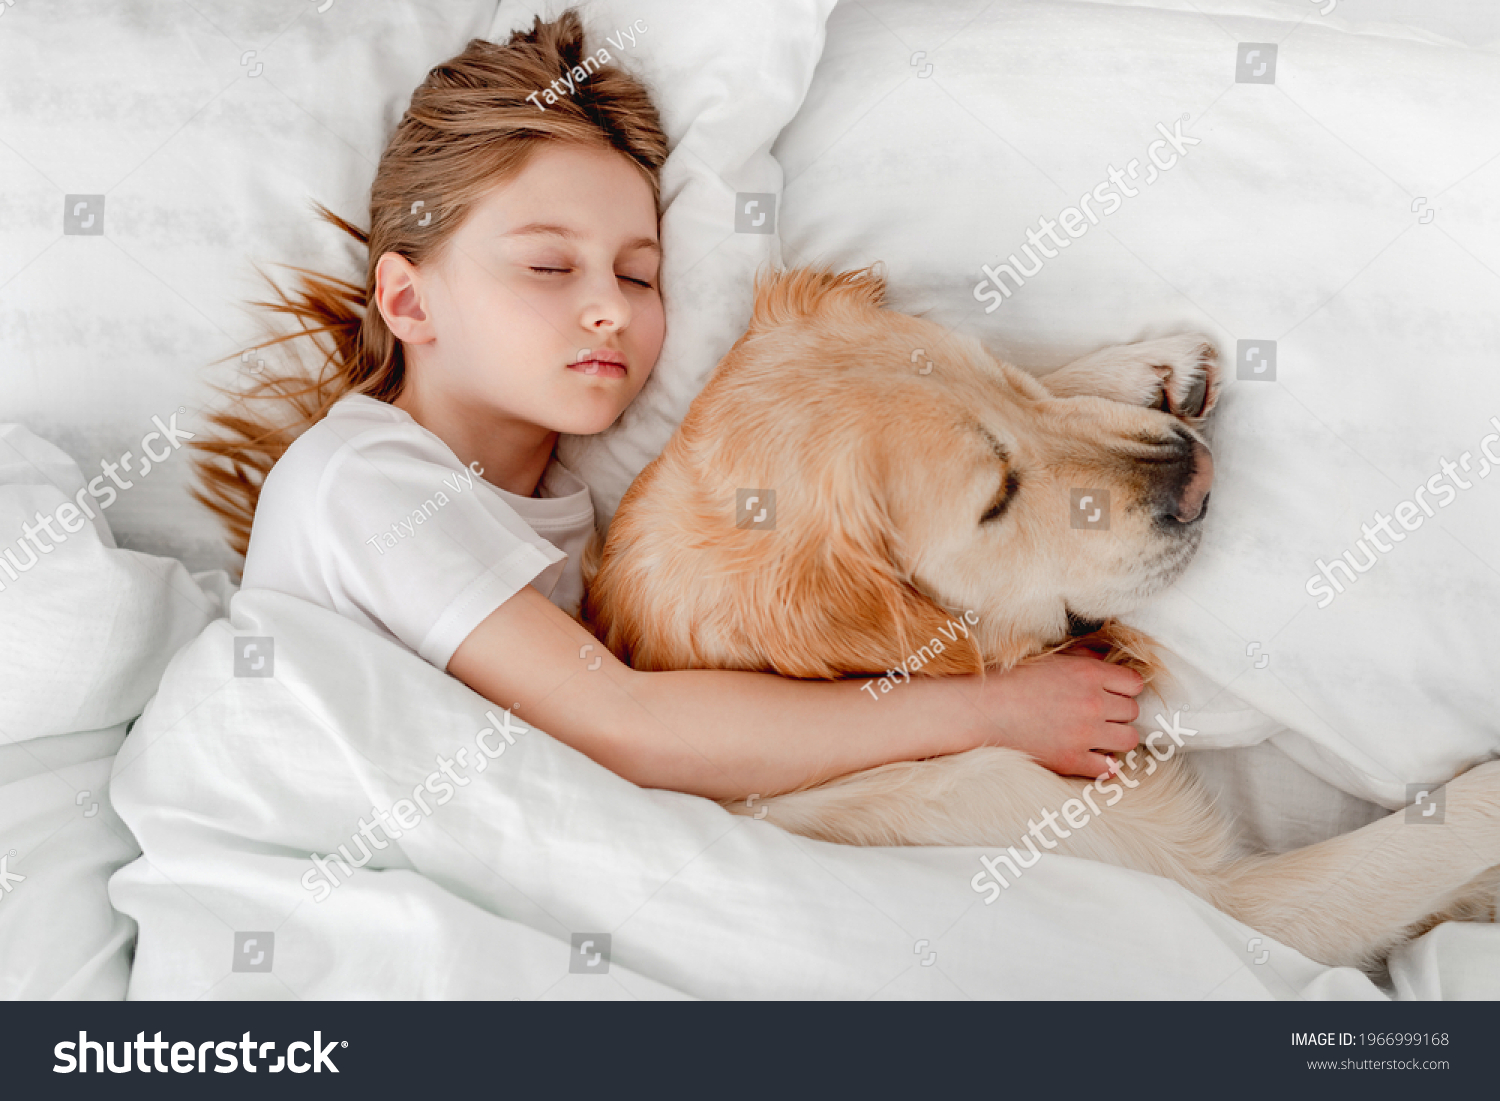 Beautiful little girl staying in the bed with golden retriever dog in the morning time and napping. Kid sleeping with pet at home. Portrait of friendship between human child and animal #1966999168